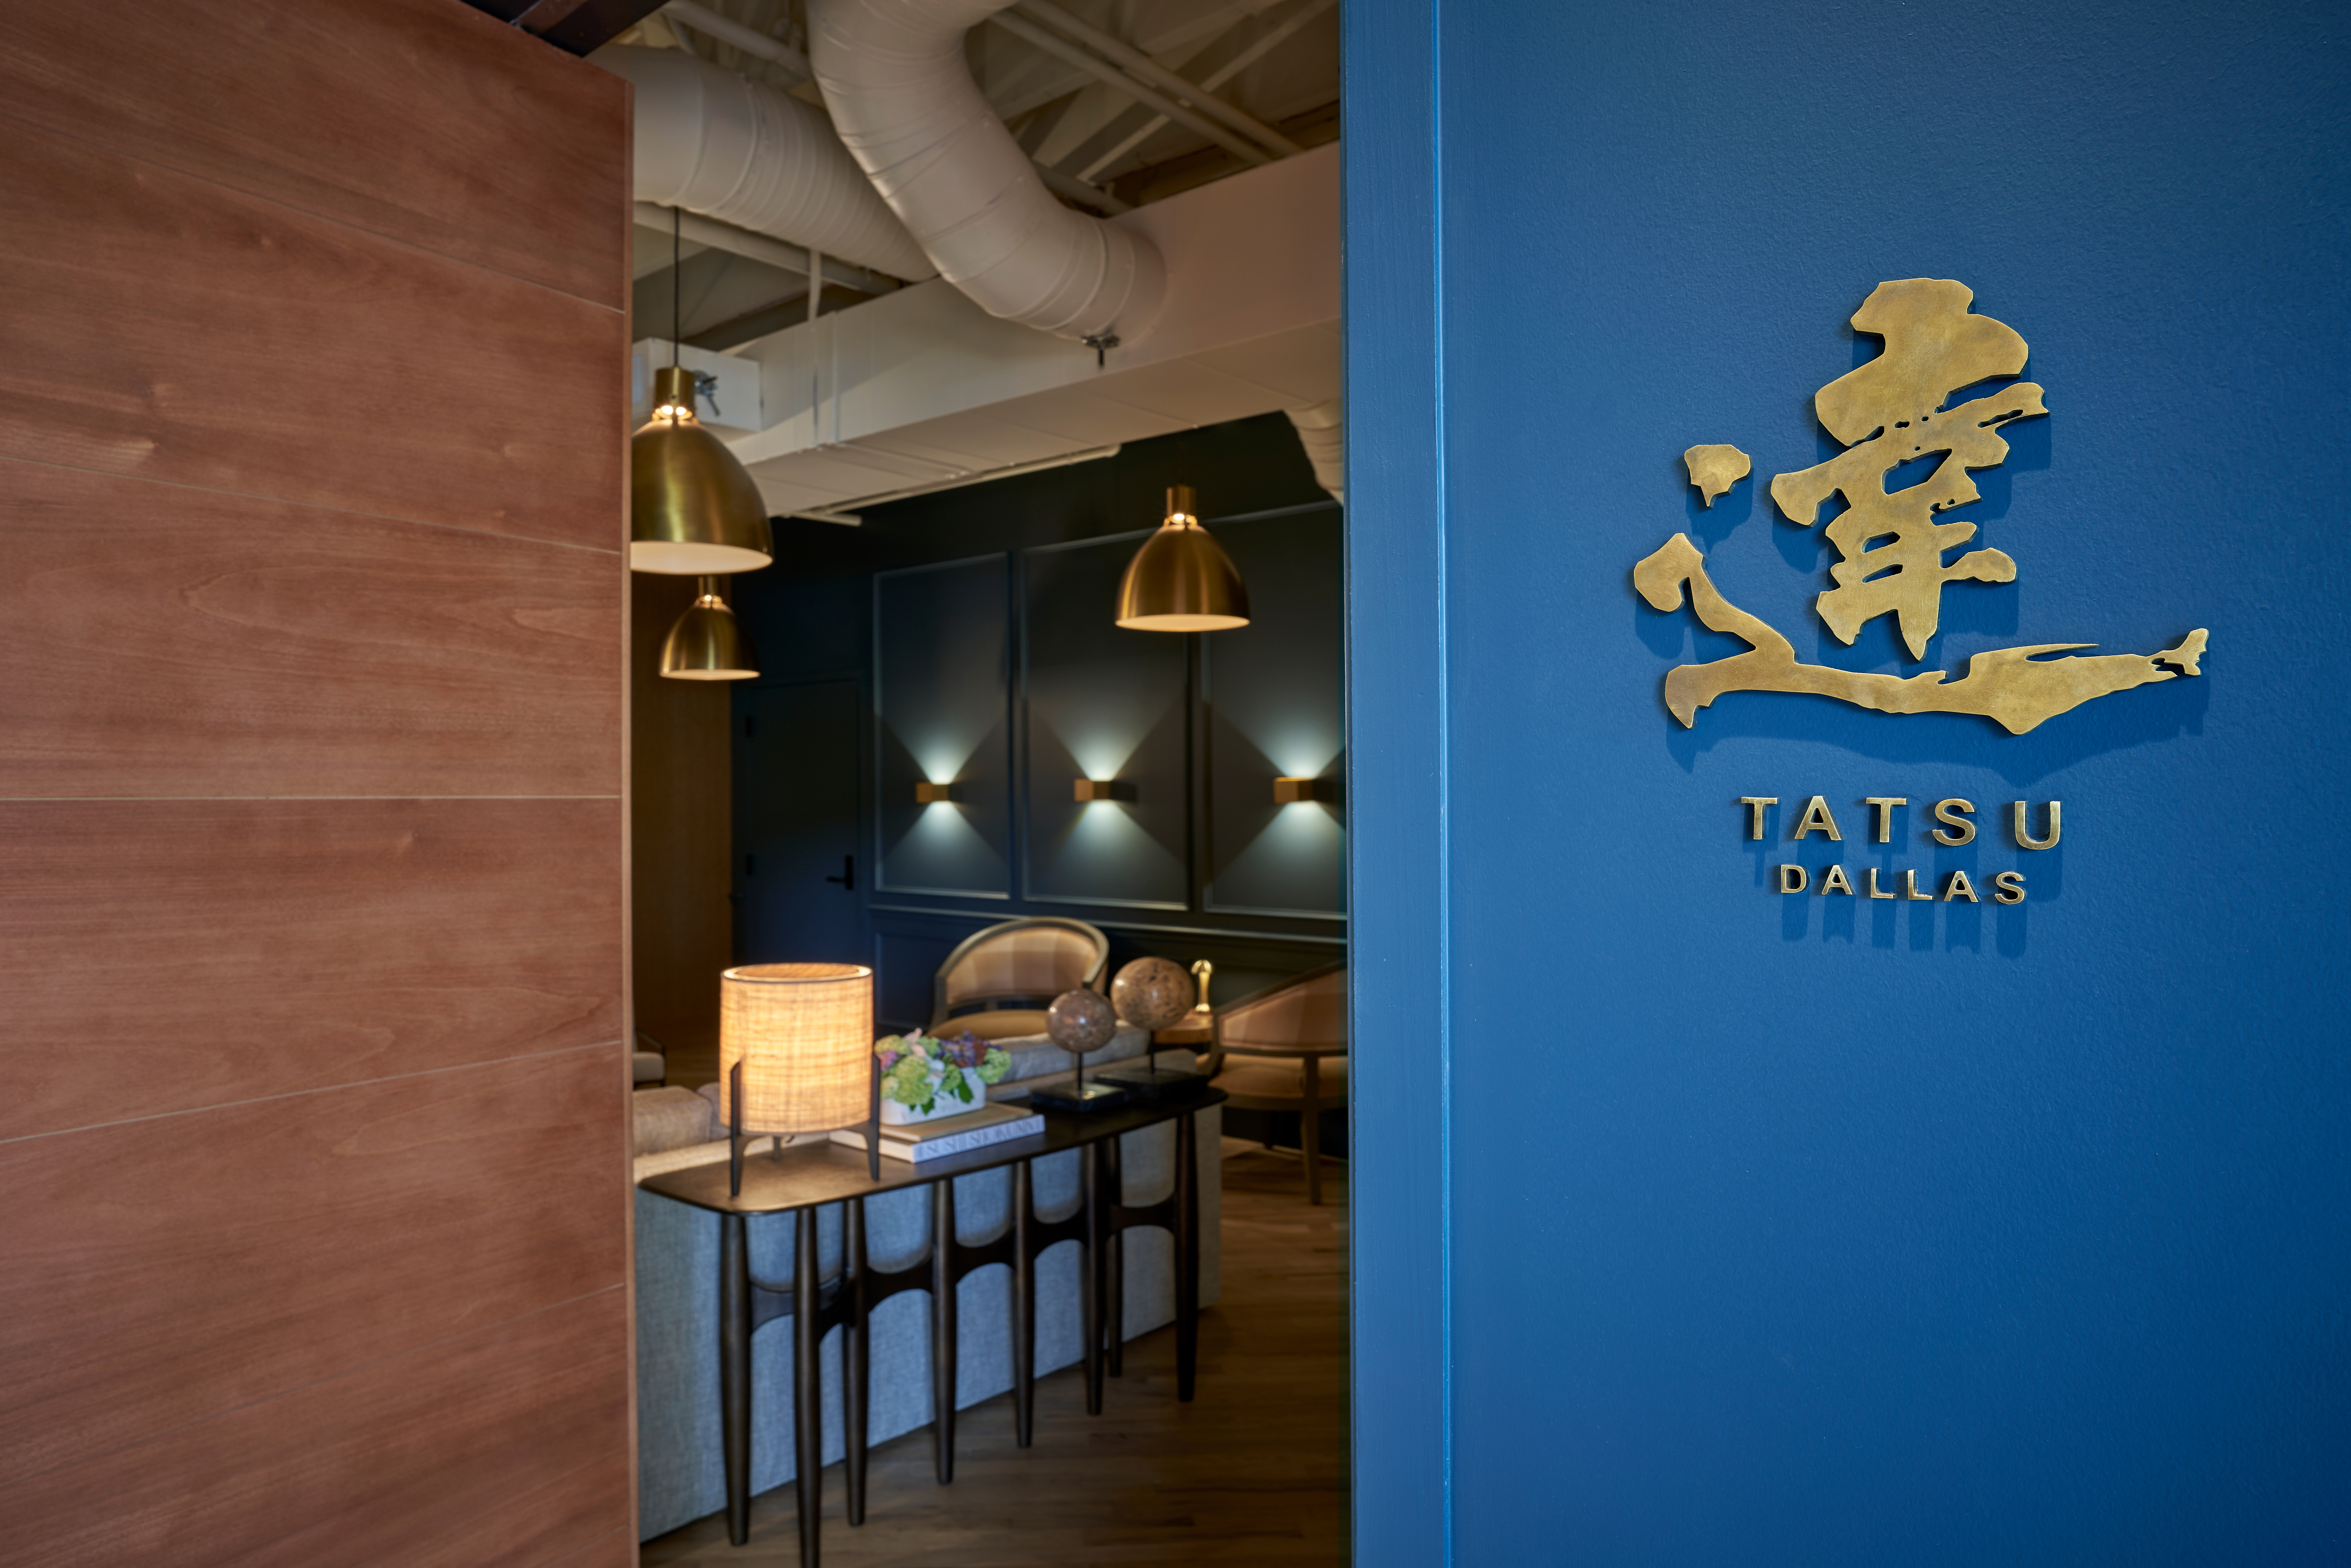 Between a blue door with the words “Tastu Dallas” and a gold design, and a wooden wall, peeks out a glimpse into a small dining room where sushi is served.